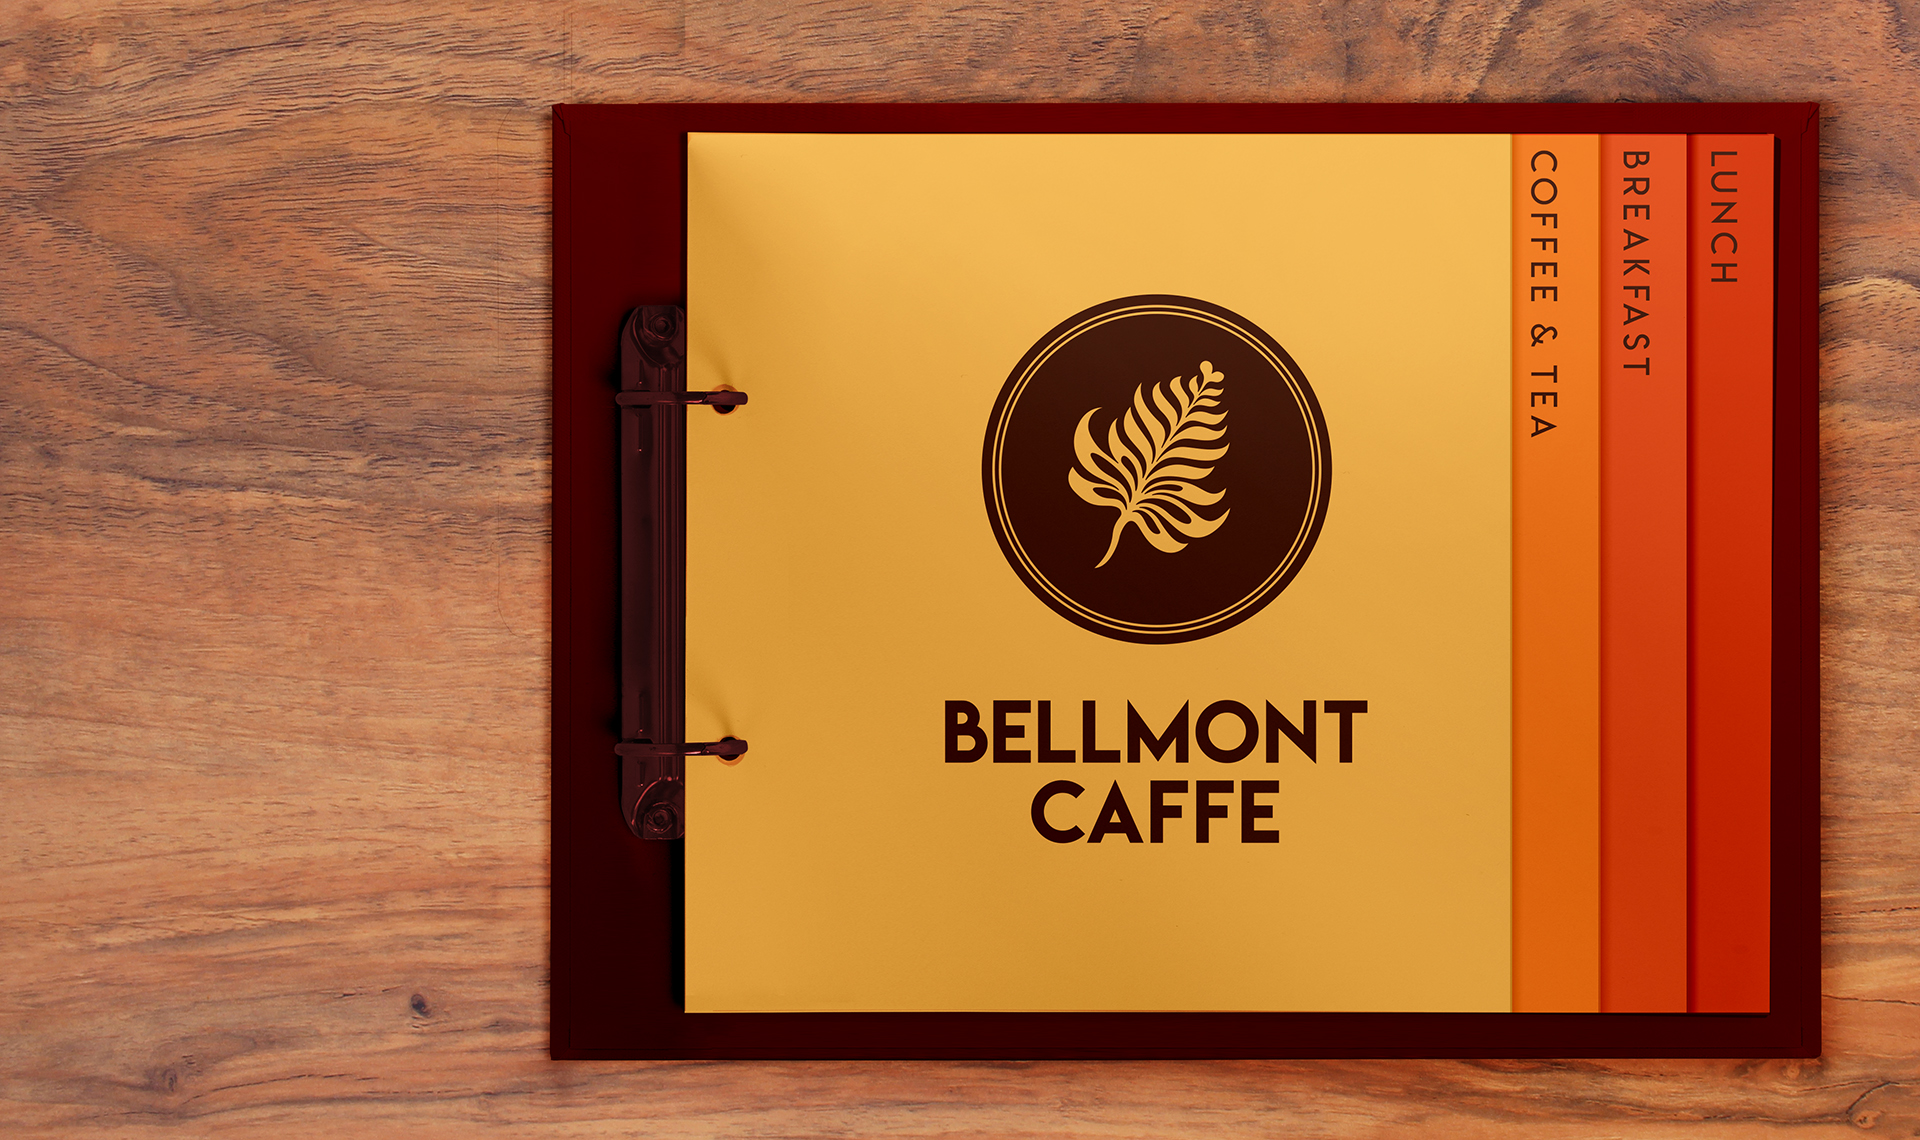 Menu mockup with logo for Bellmont Caffe, a local coffee shop.